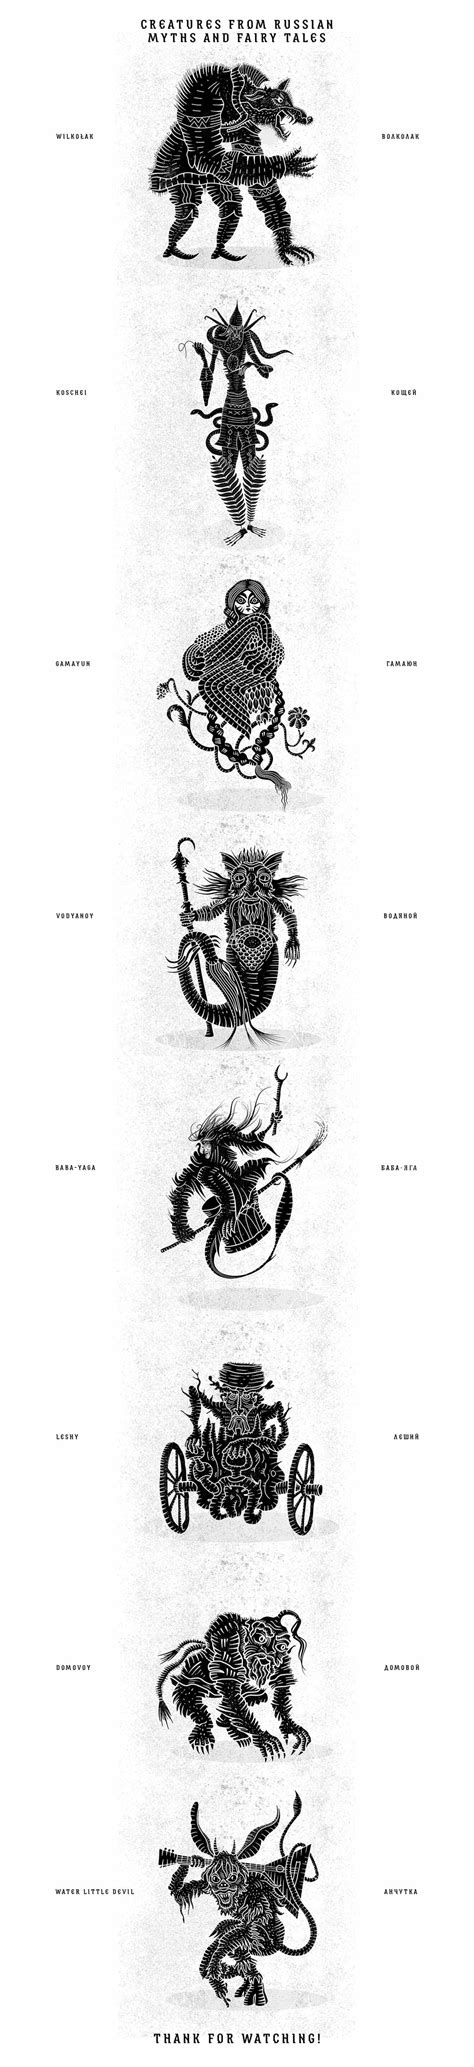 Creatures From Russian Myths And Fairy Tales